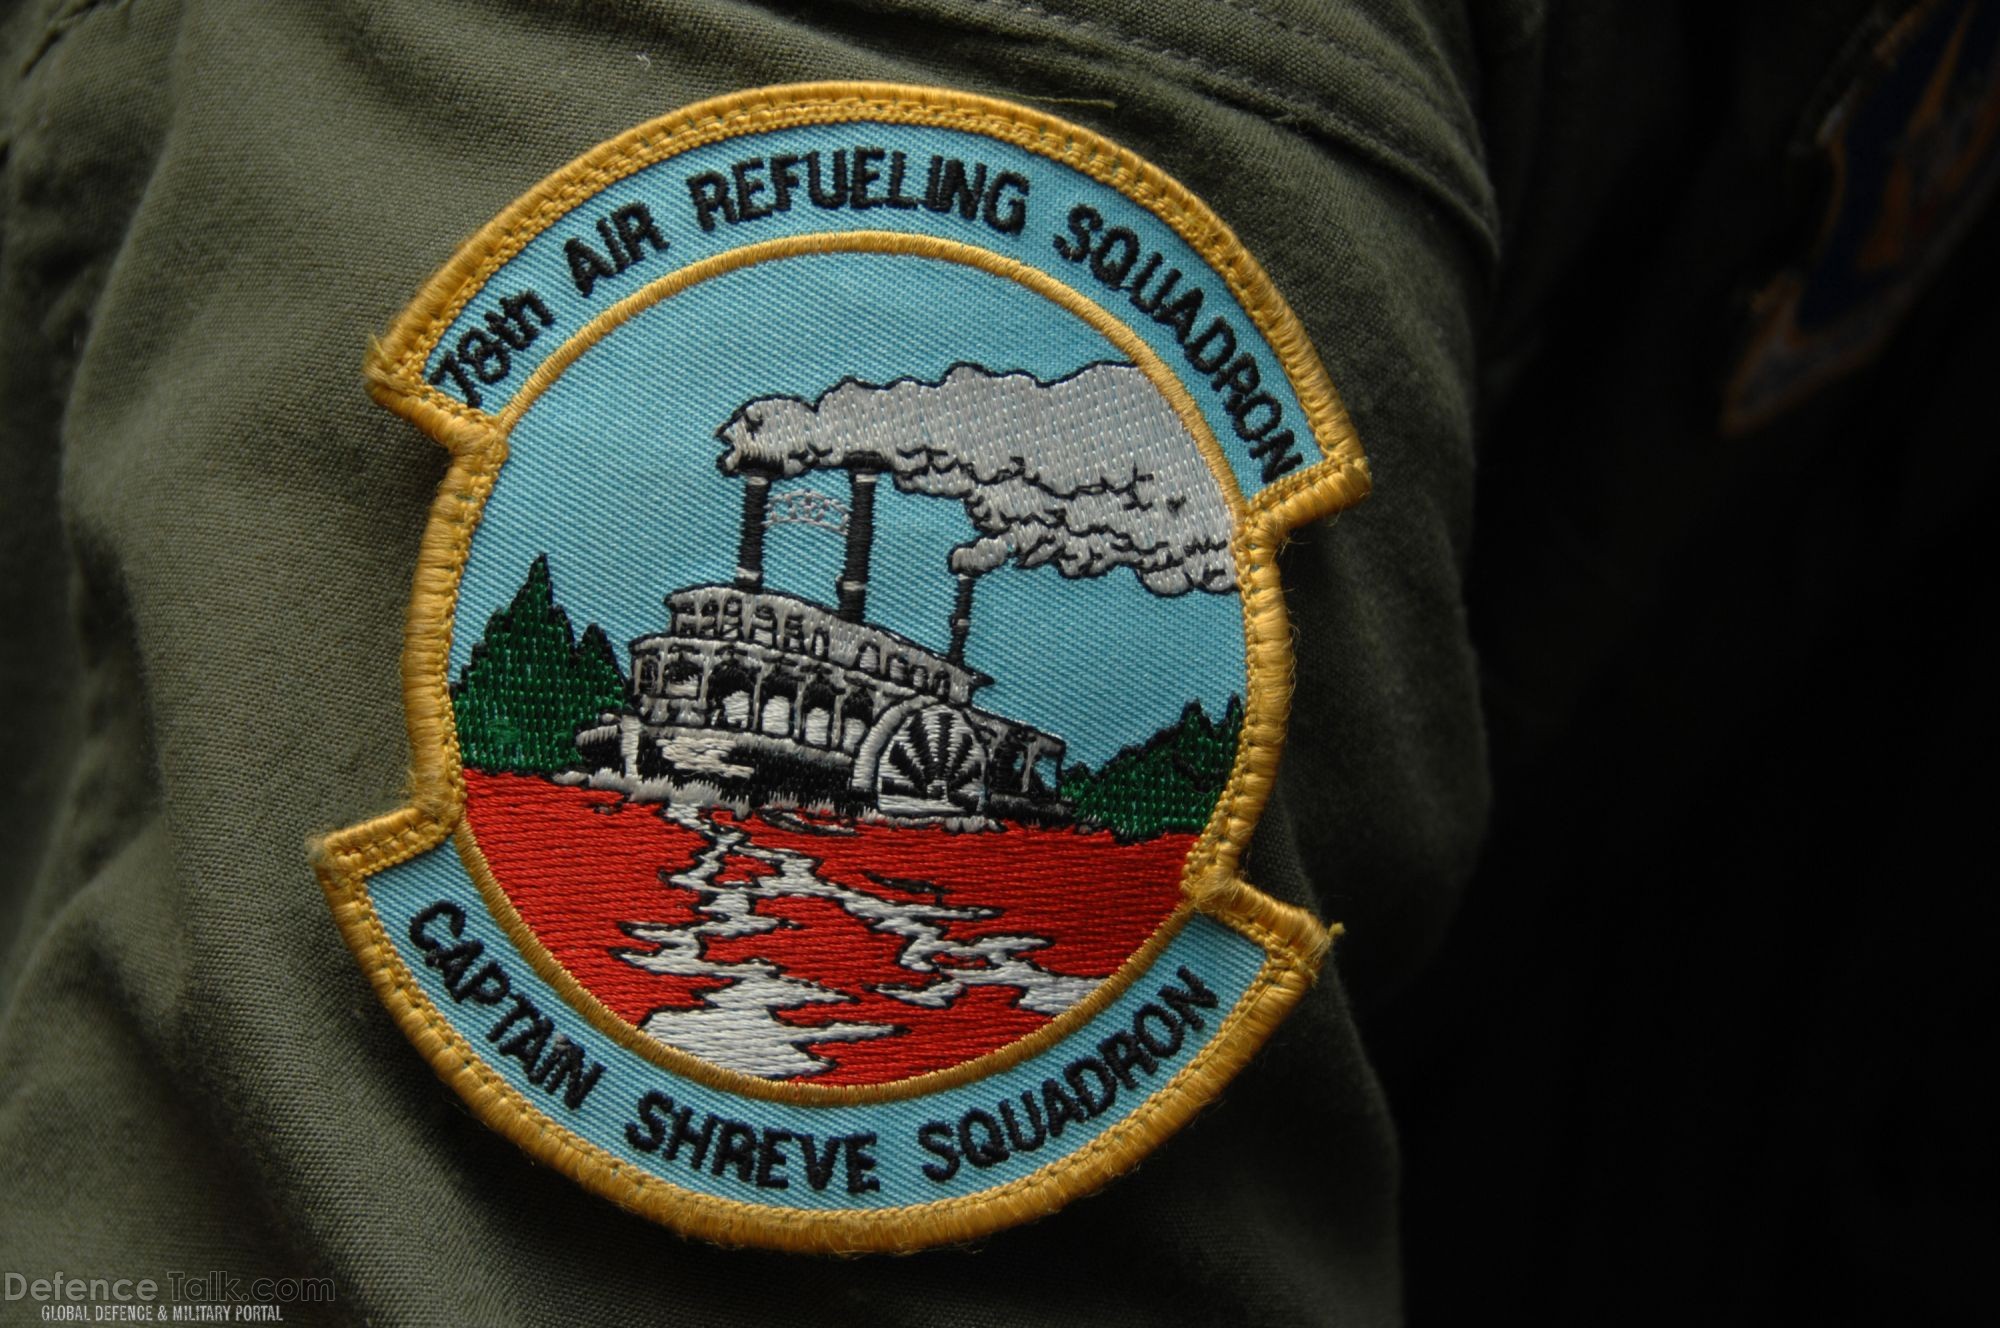 The 78th Air Refueling Squadron patch